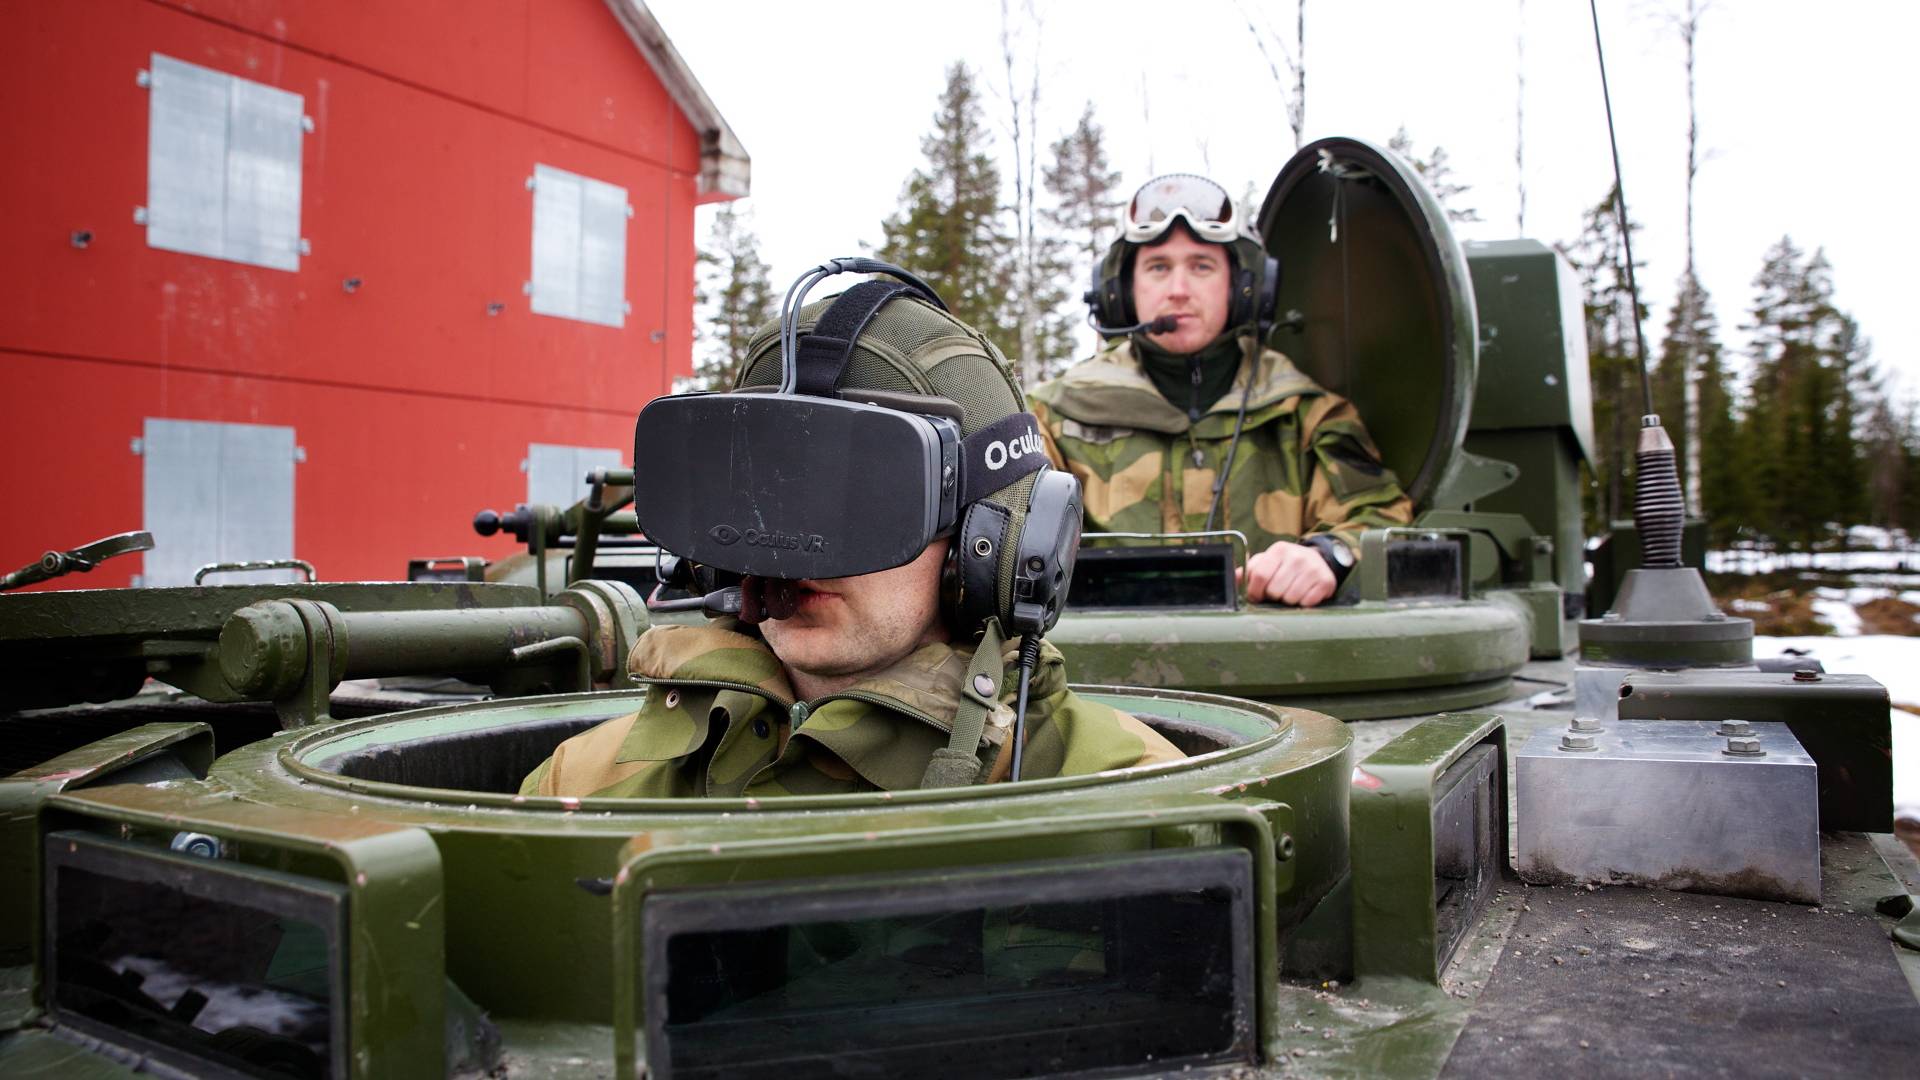 Oculus Rift augmented reality headset designs system for Norwegian Armed Forces